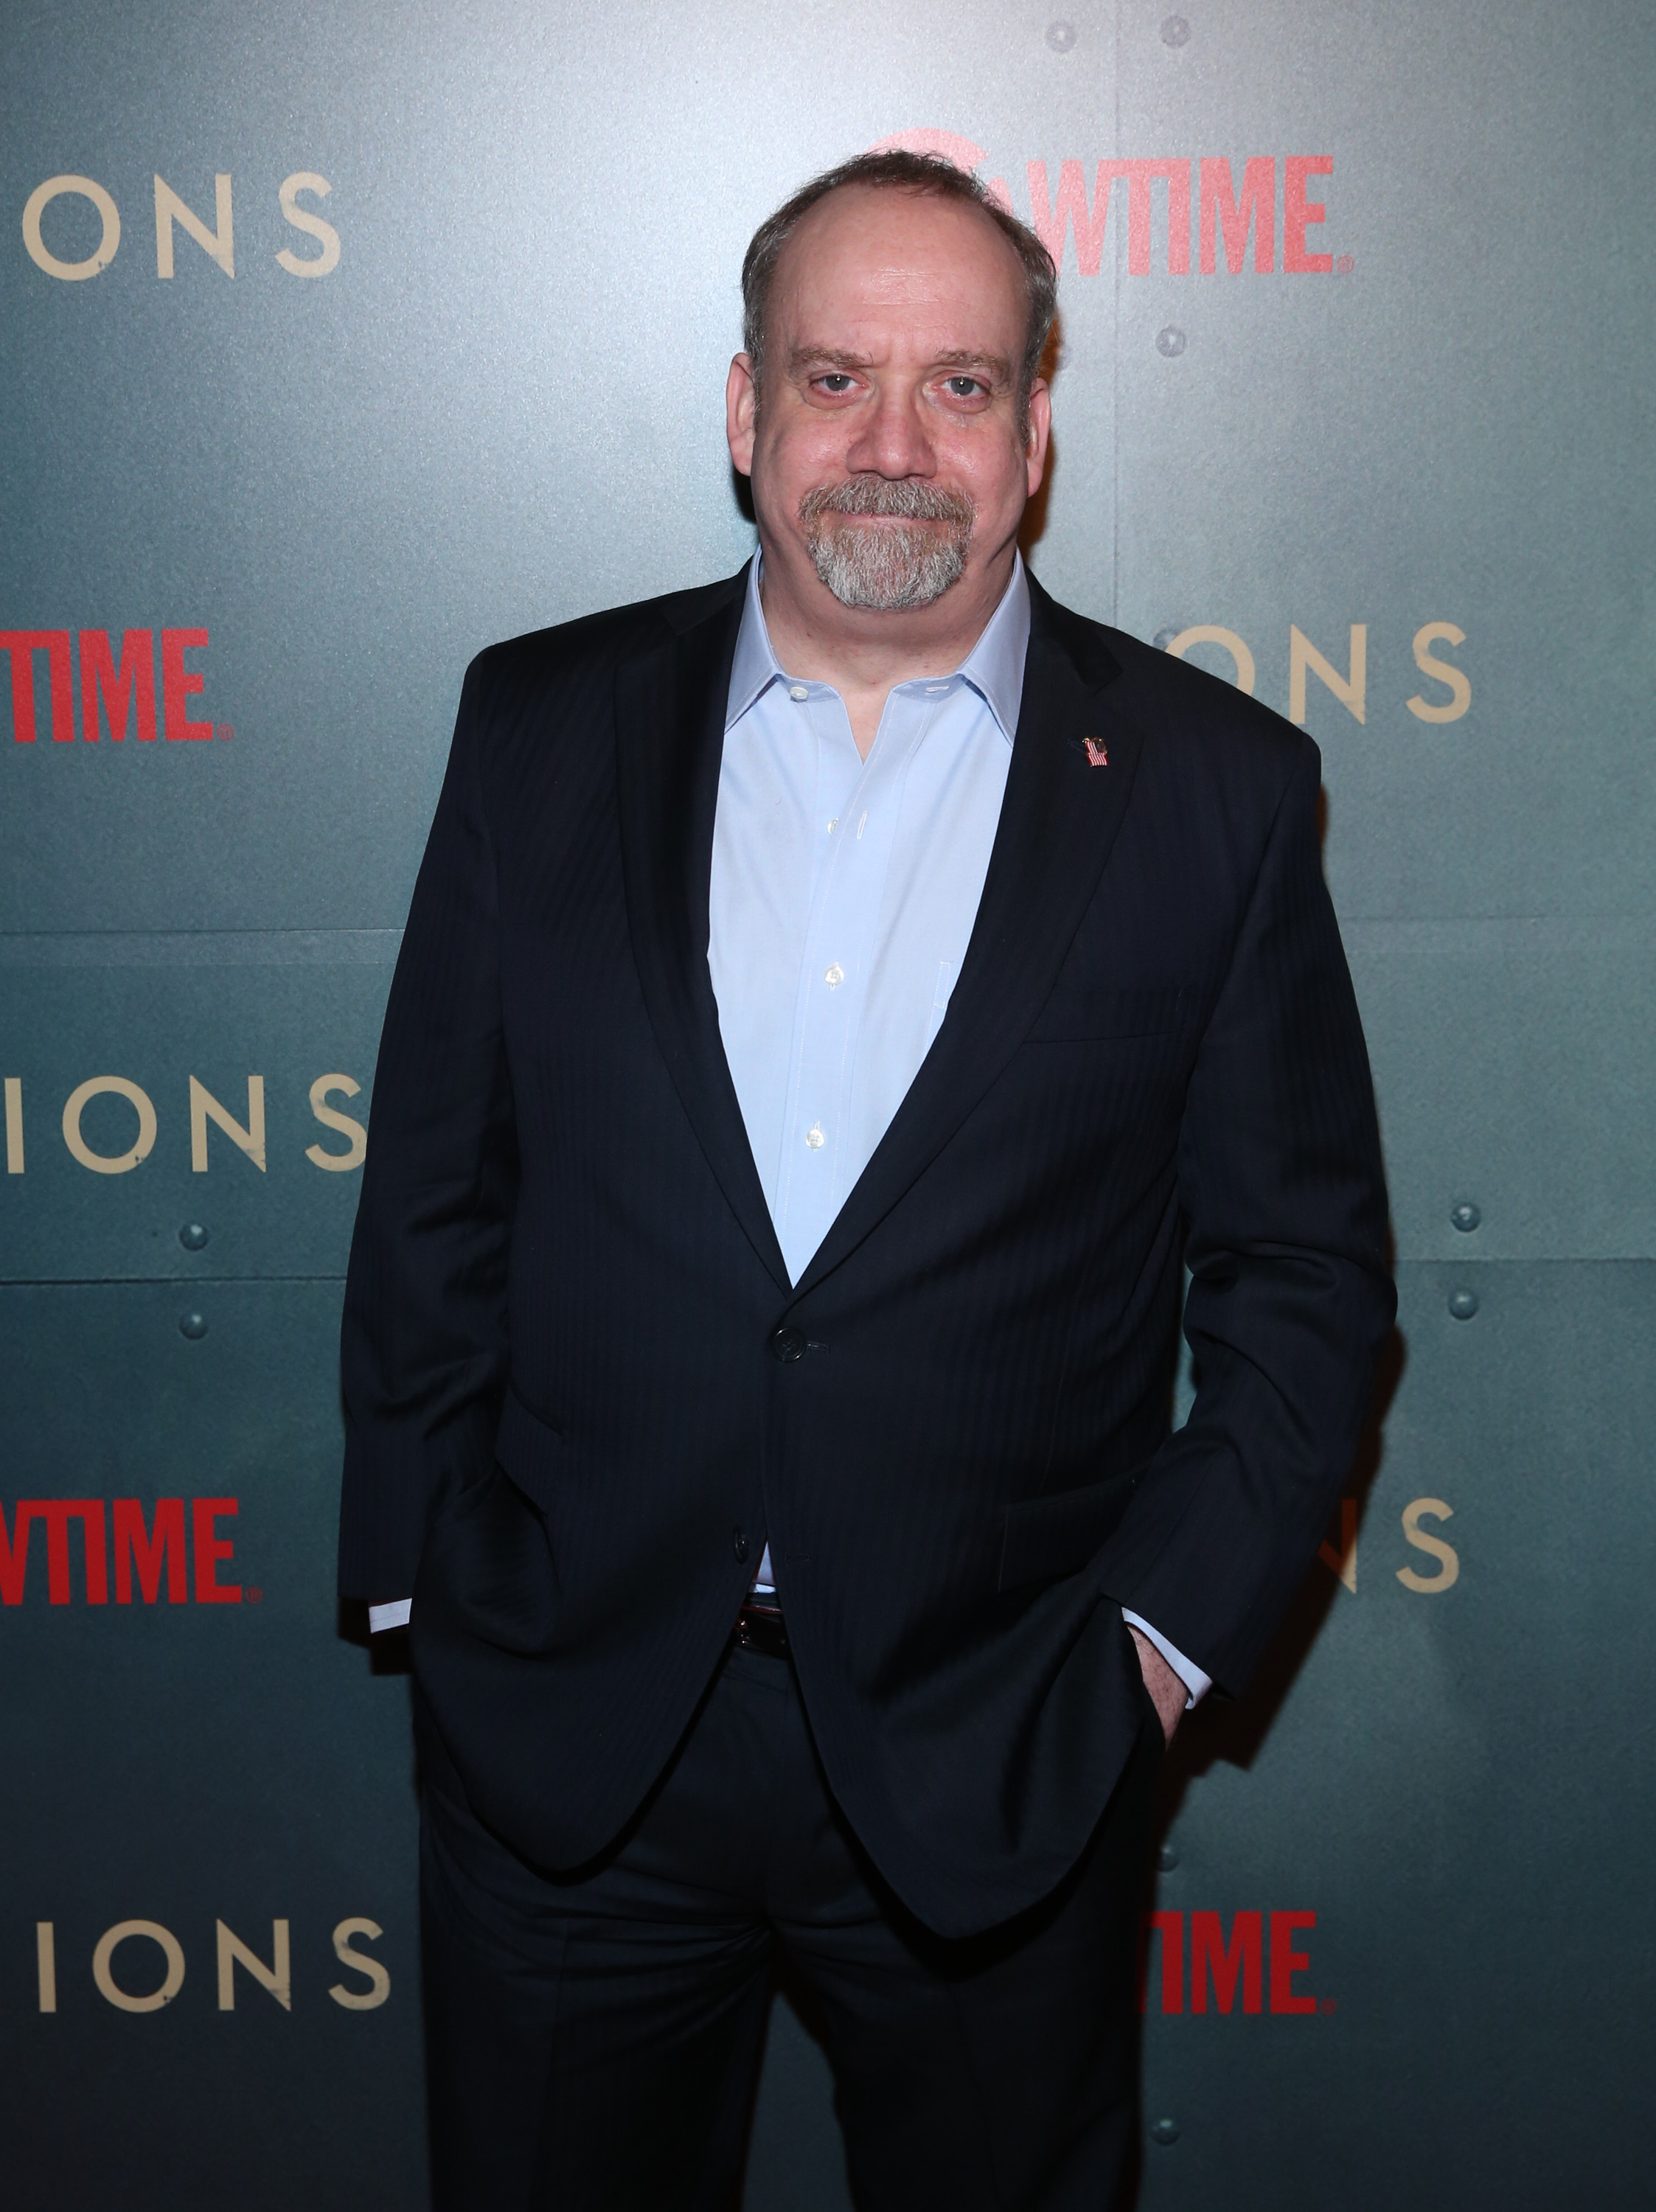 BILLIONS Season 3 Premiere at Metrograph and Cocktail Party at Mr. Purple in New York City